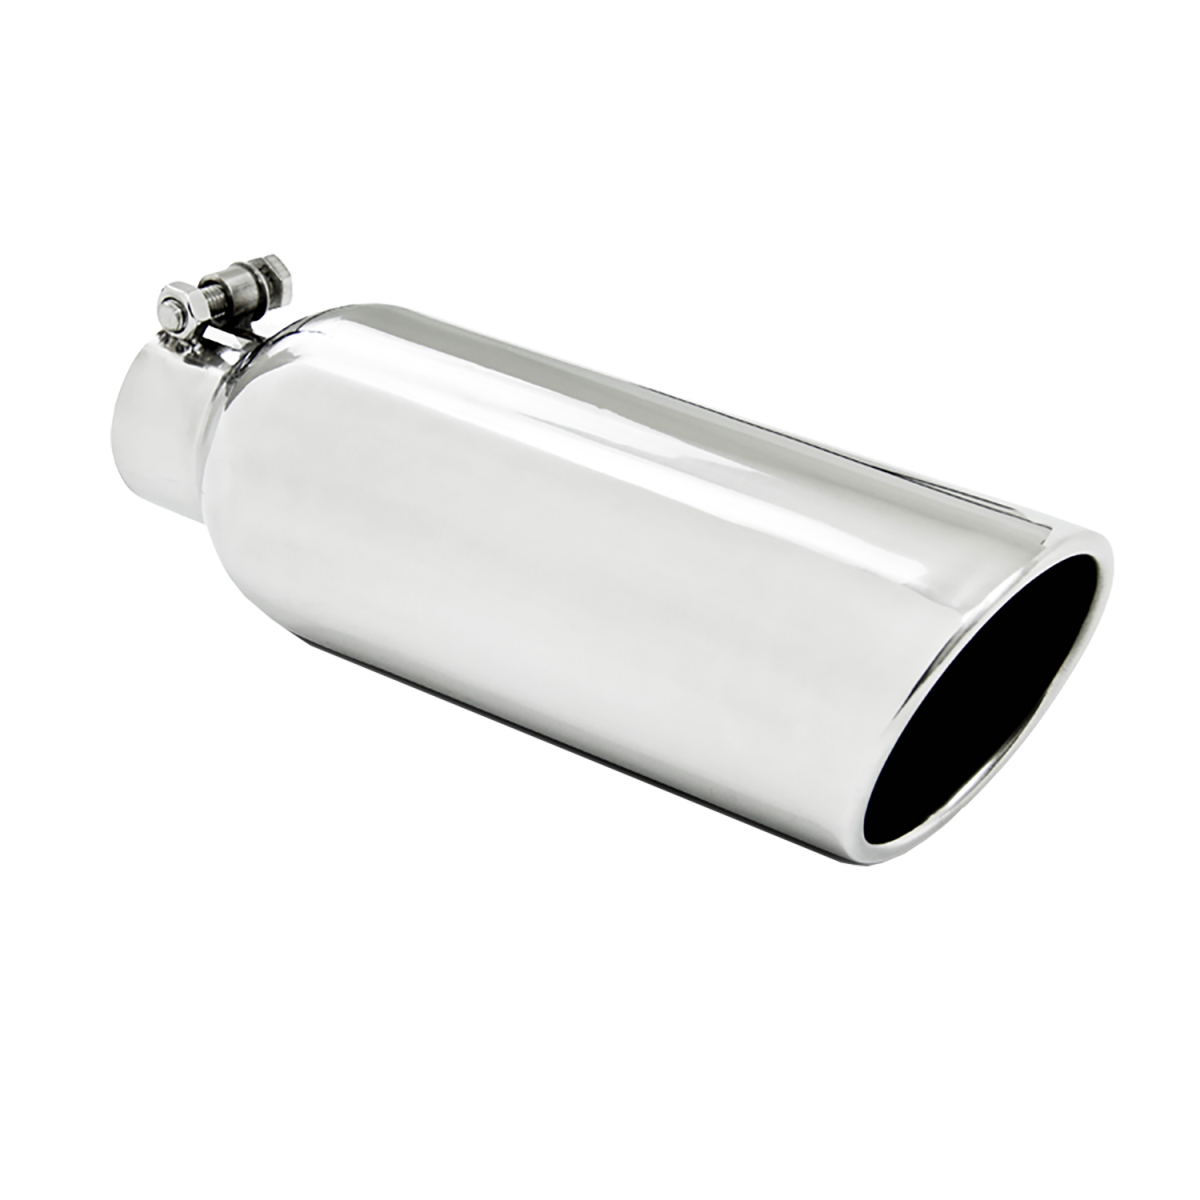 MBRP - MBRP 4 Inch OD 2.25 Inch Inlet 12 Inch Length Exhaust Tail Pipe Tip Angled Cut Rolled End Clampless No Weld T304 Stainless Steel T5149